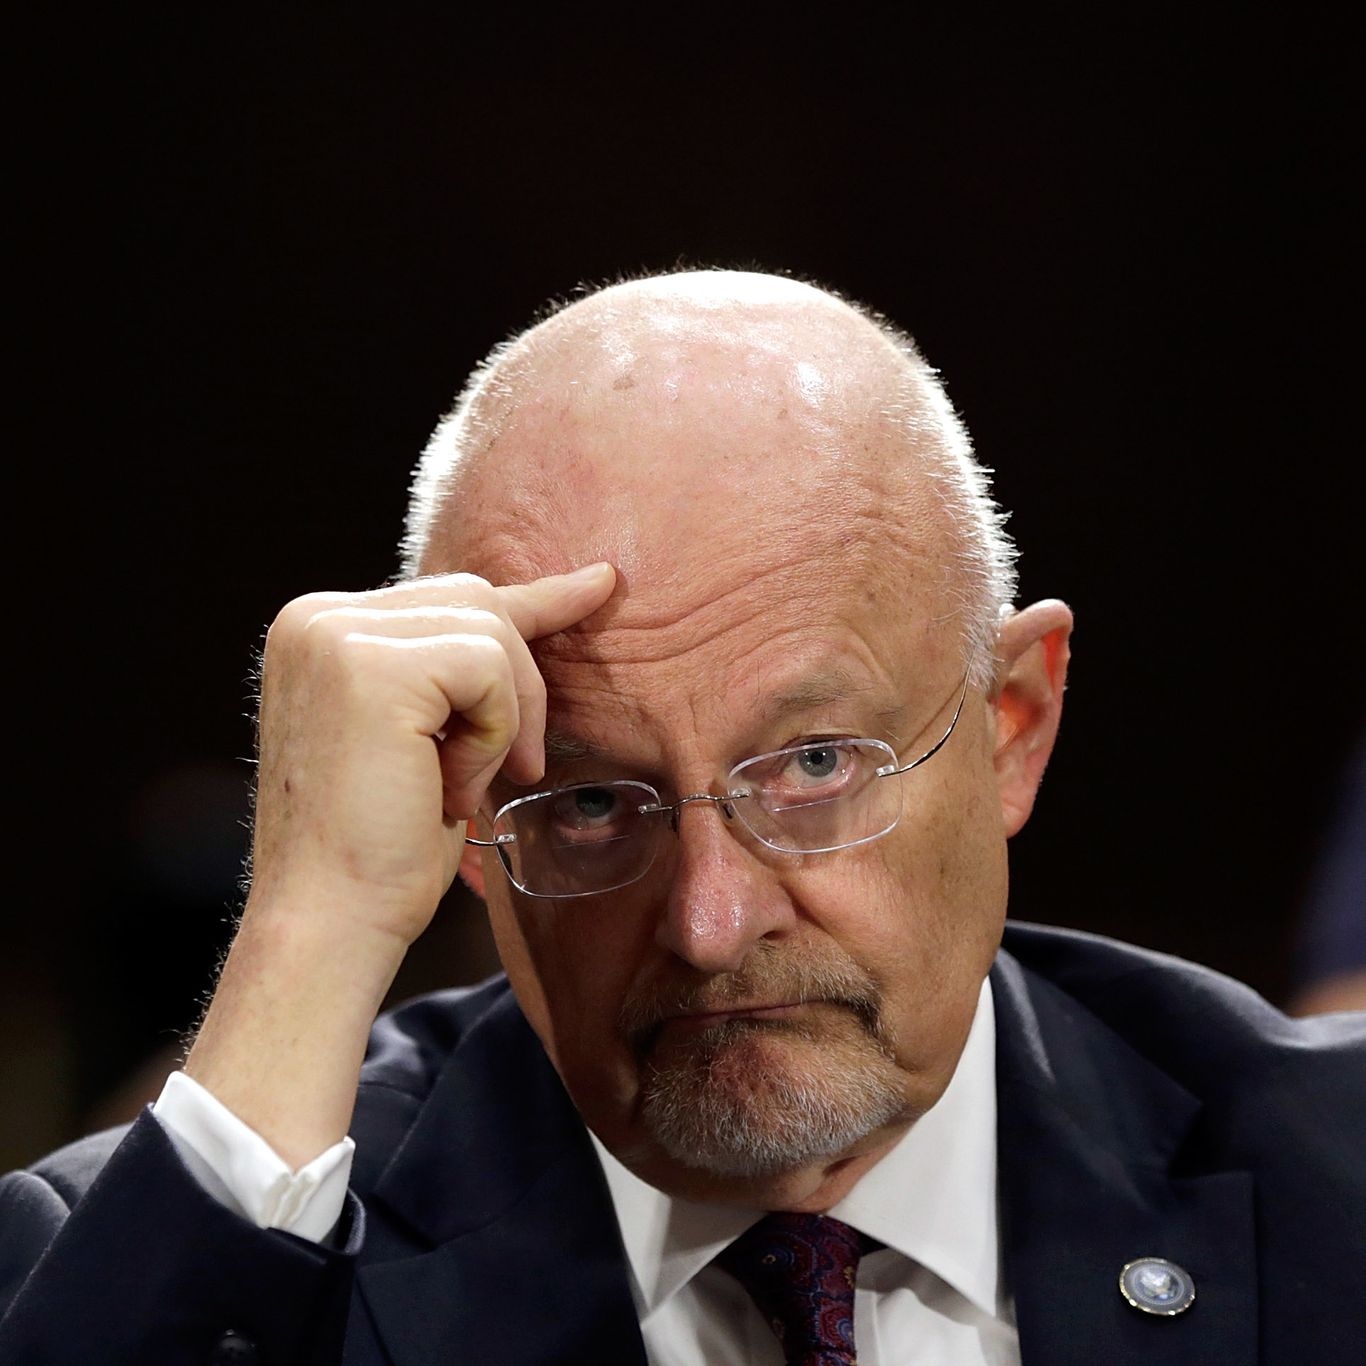 James Clapper on Donald Trump, Russia, and the First Line of His